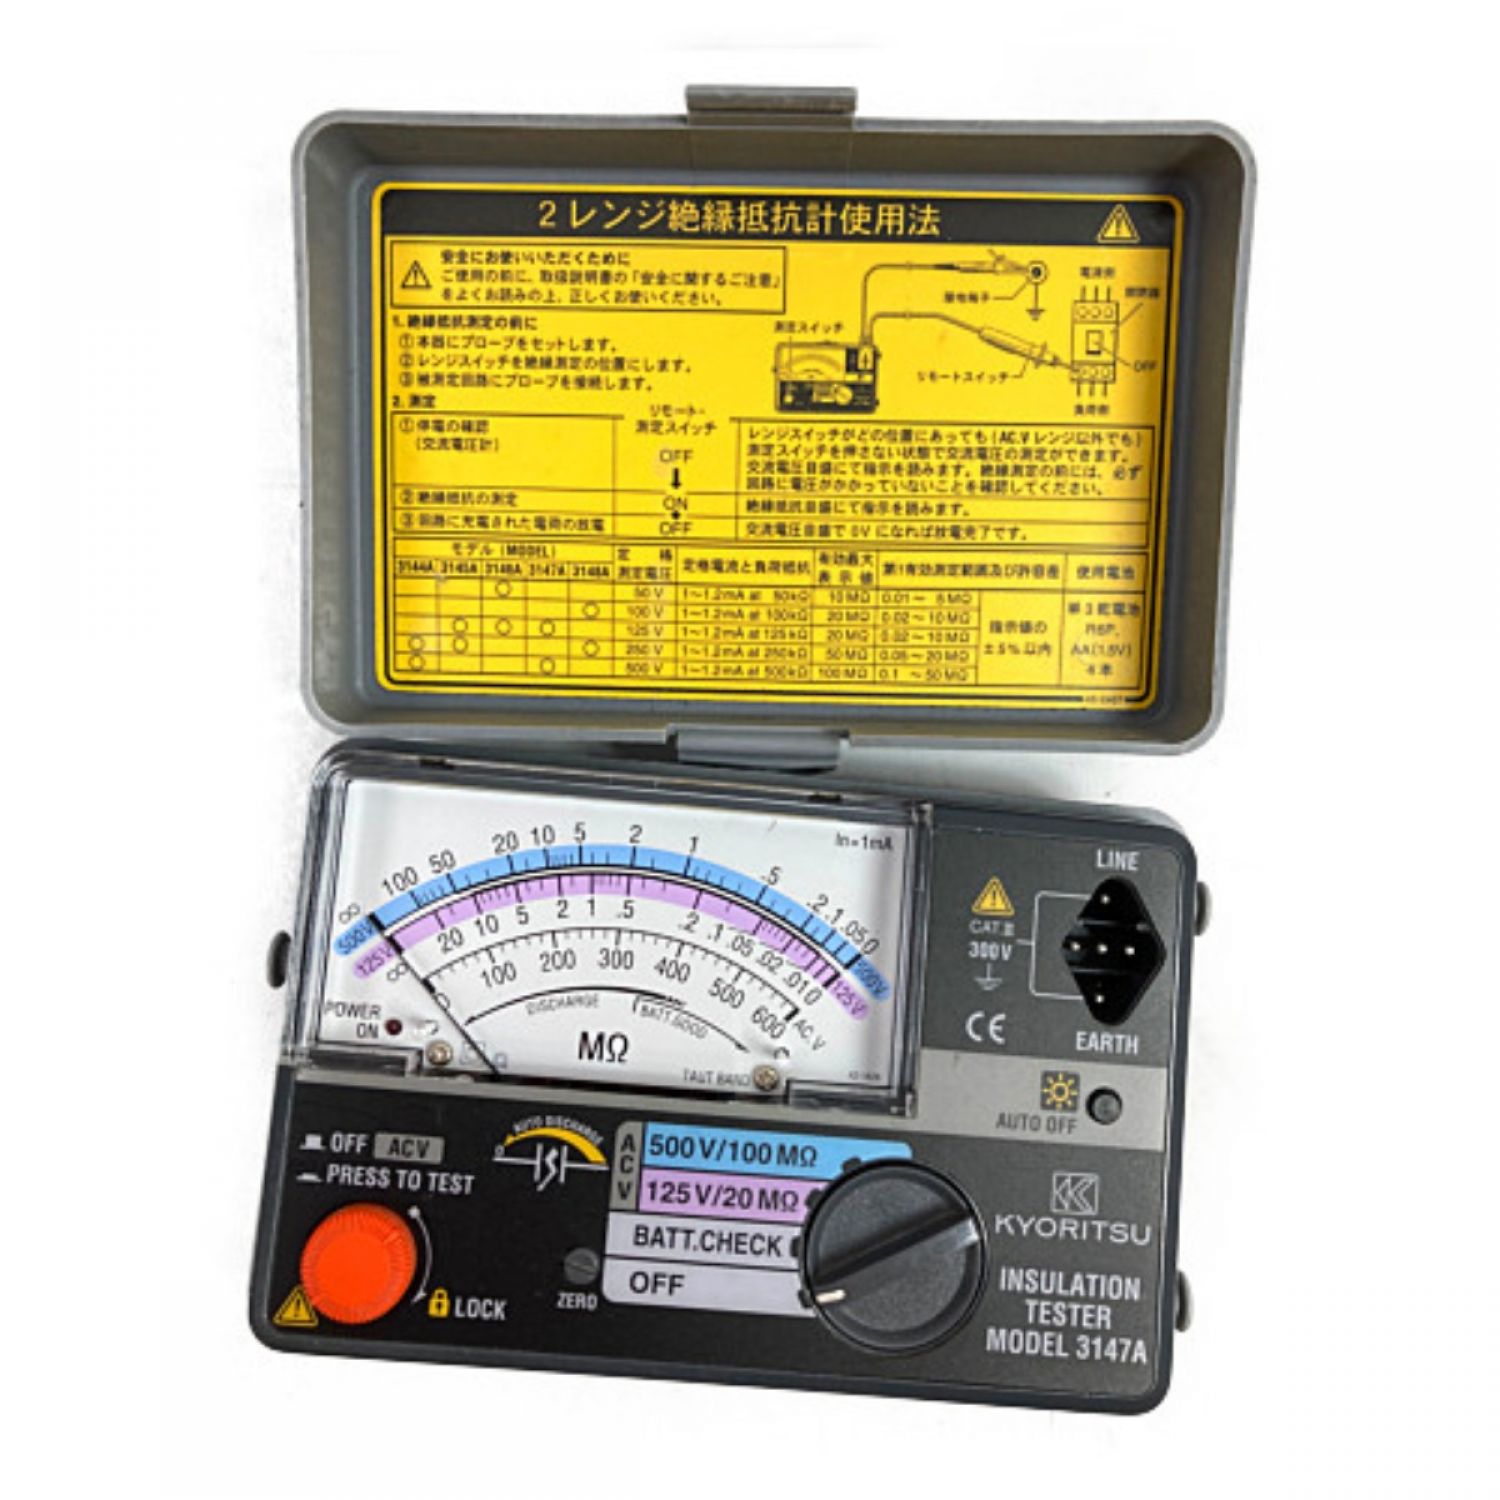 INSULATION TESTER 絶縁抵抗値計 3144A